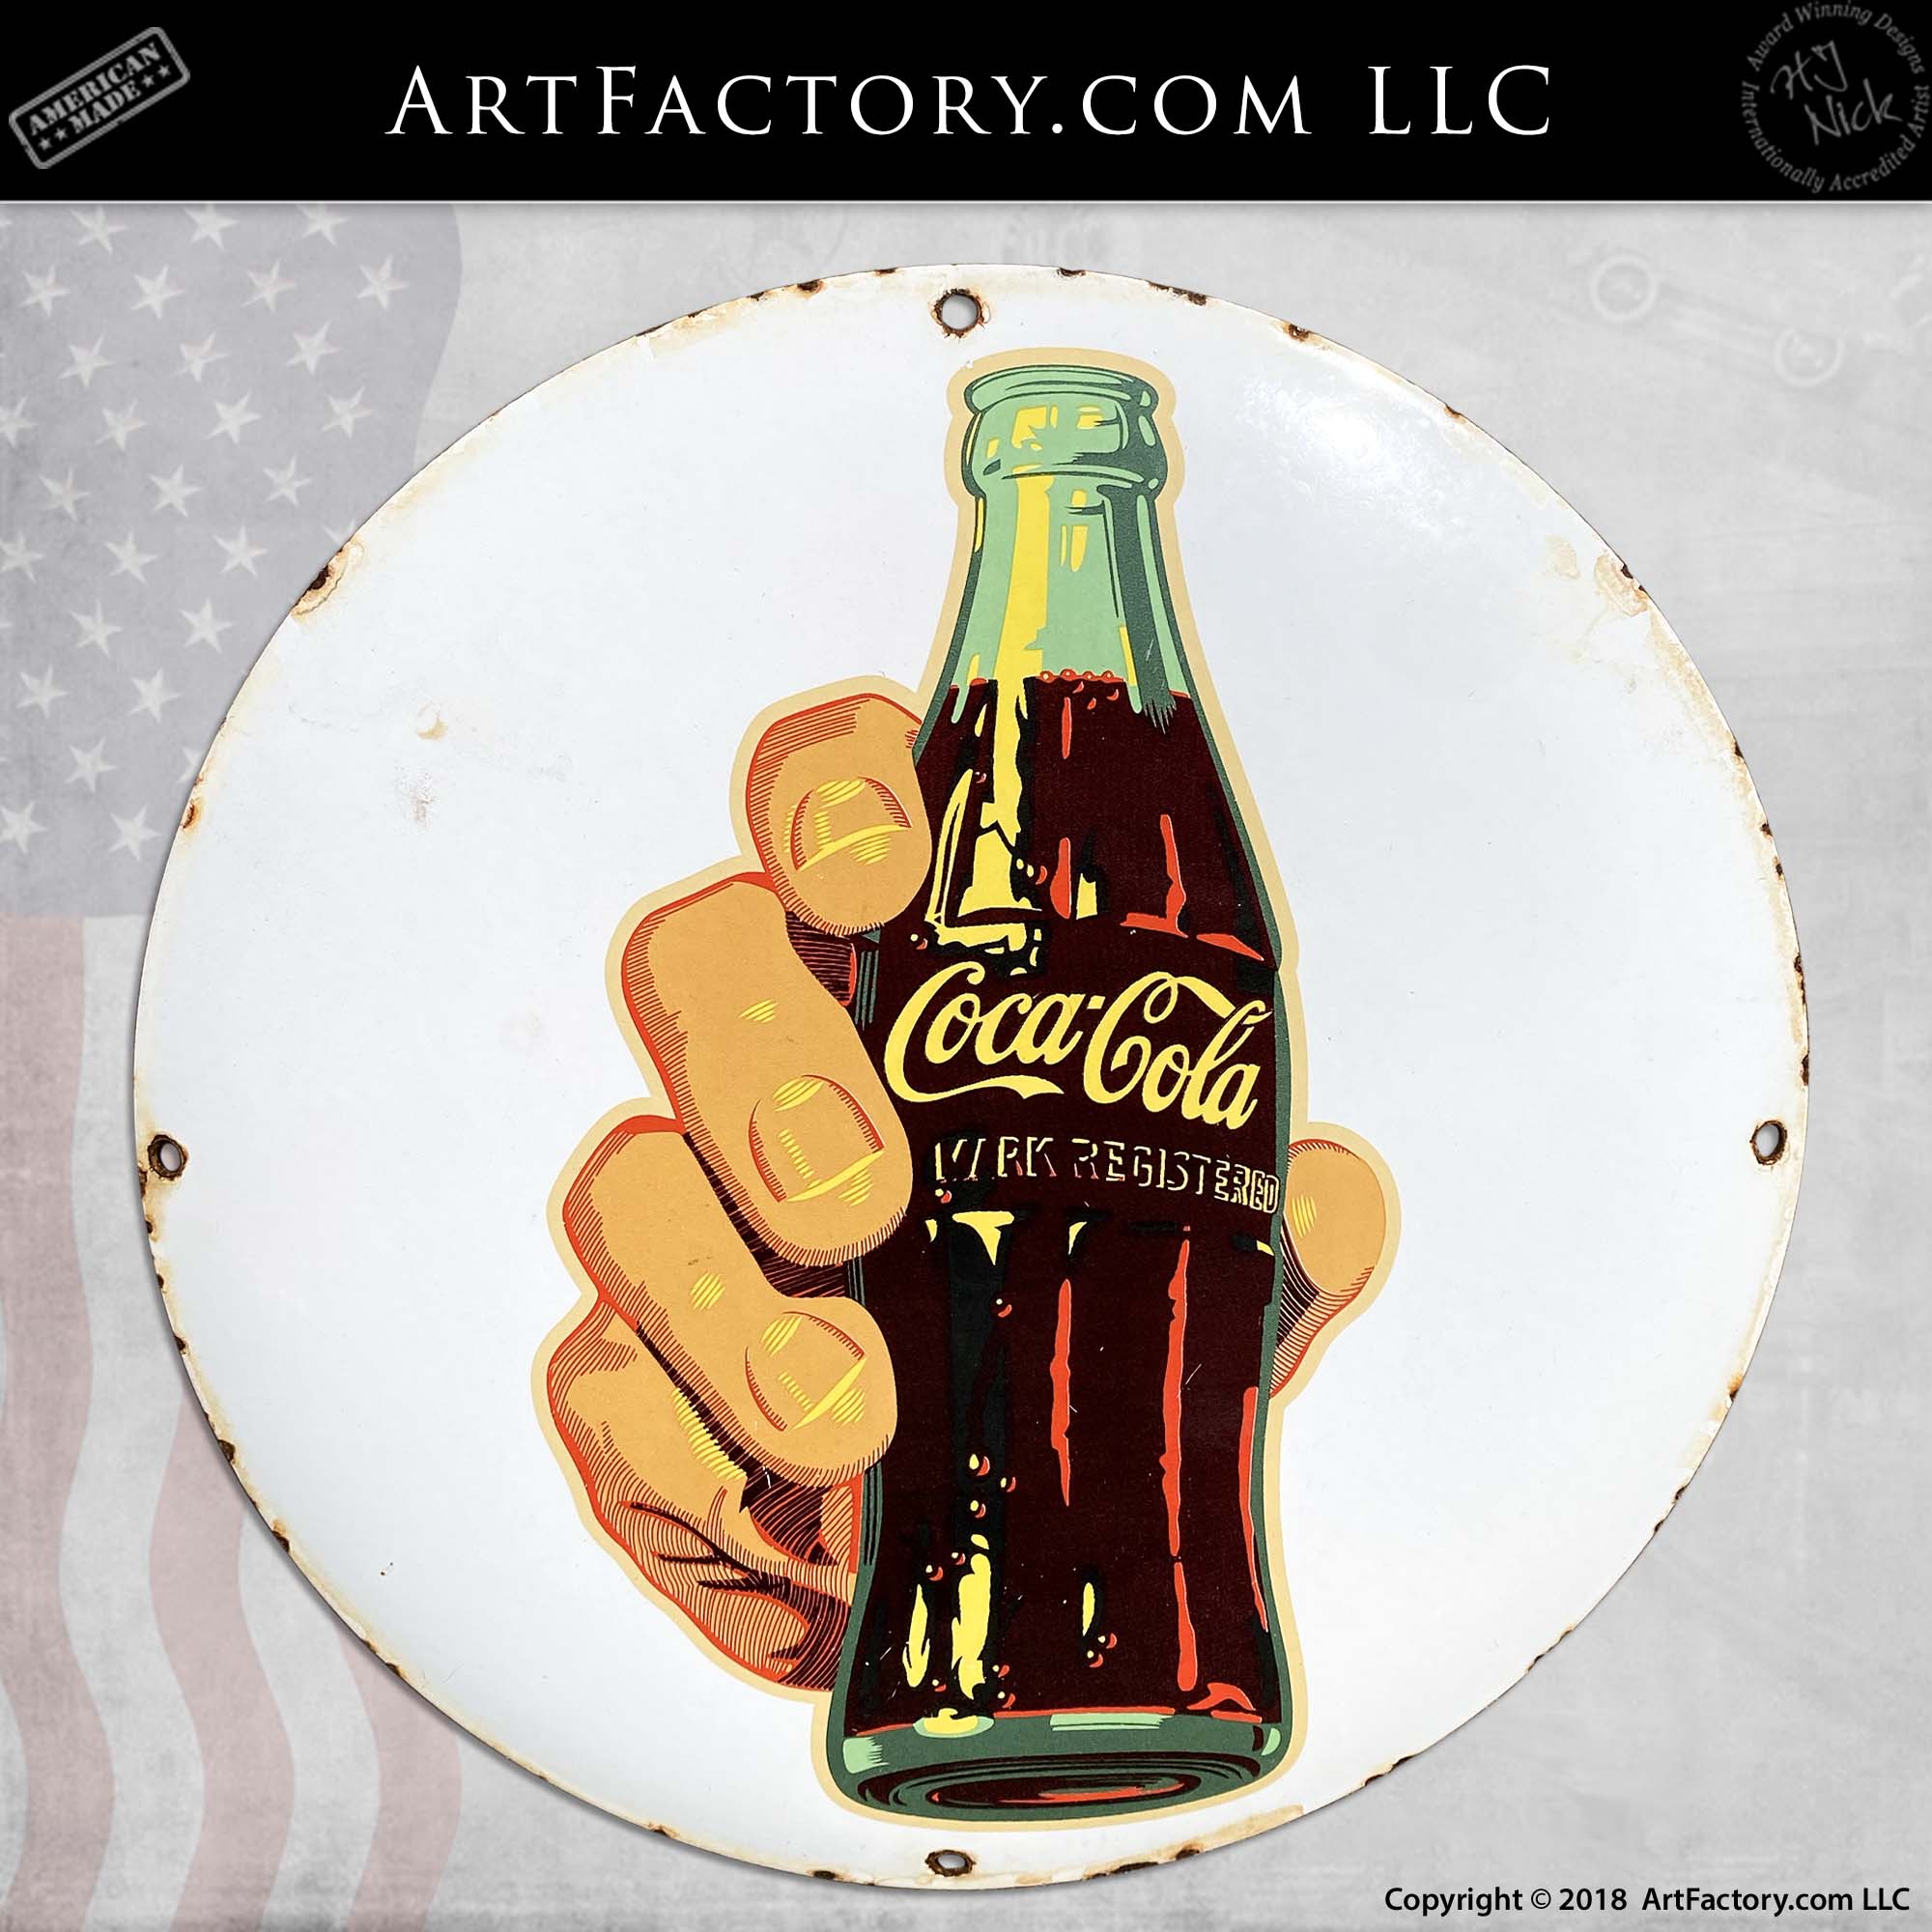 ROUND VINTAGE STYLE COKE COCA COLA BOTTLE RED METAL TIN SIGN Made in USA America 